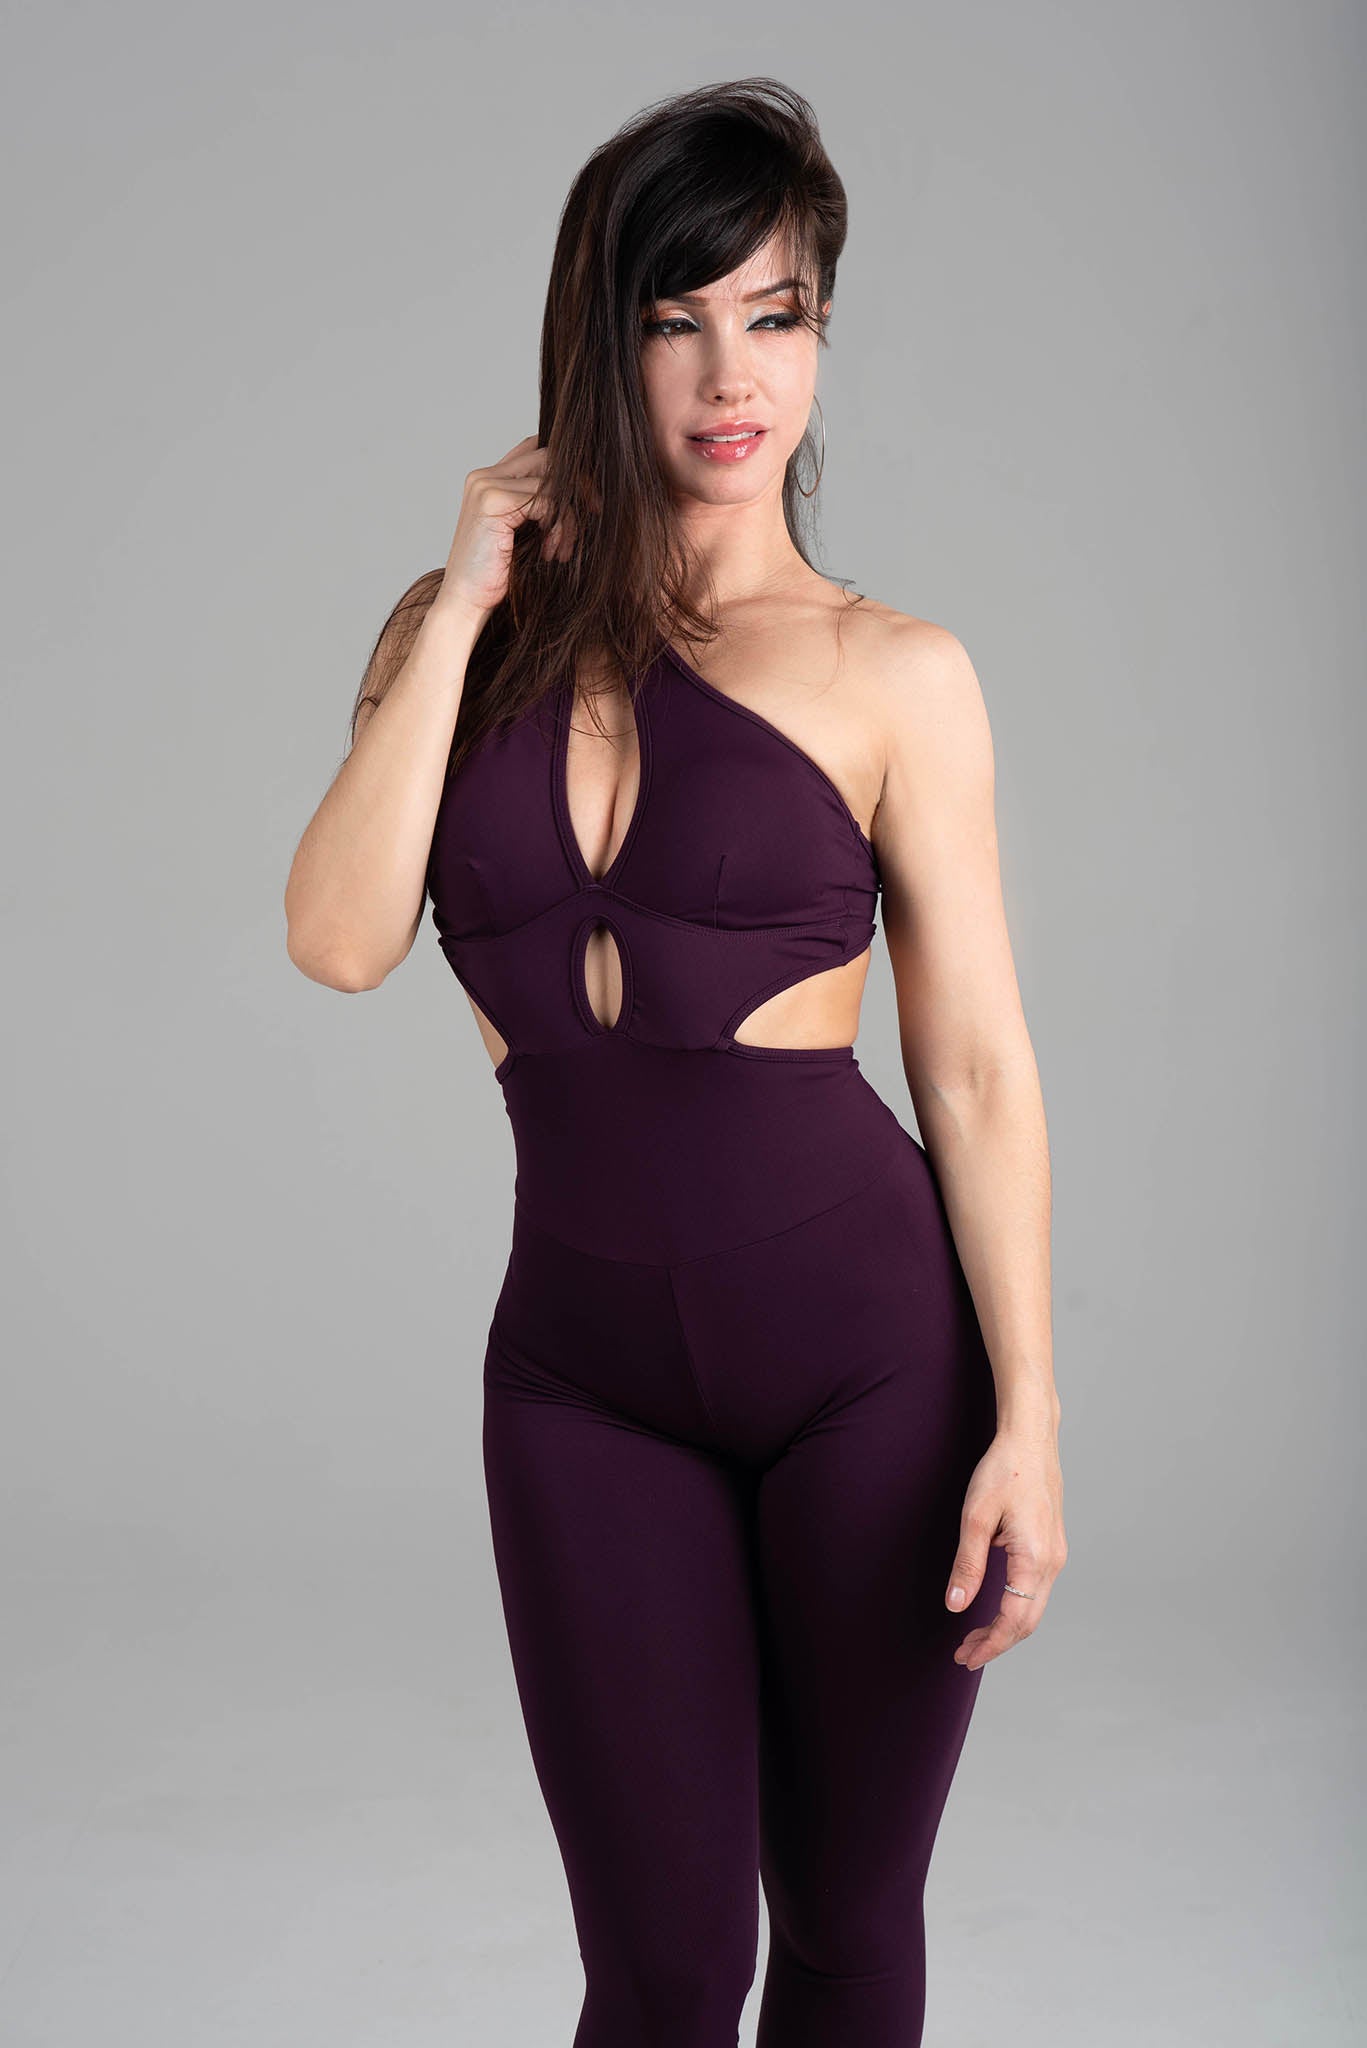 Amore Bodysuit - Anita Santos Rubin Collection - Wine only available - Lure